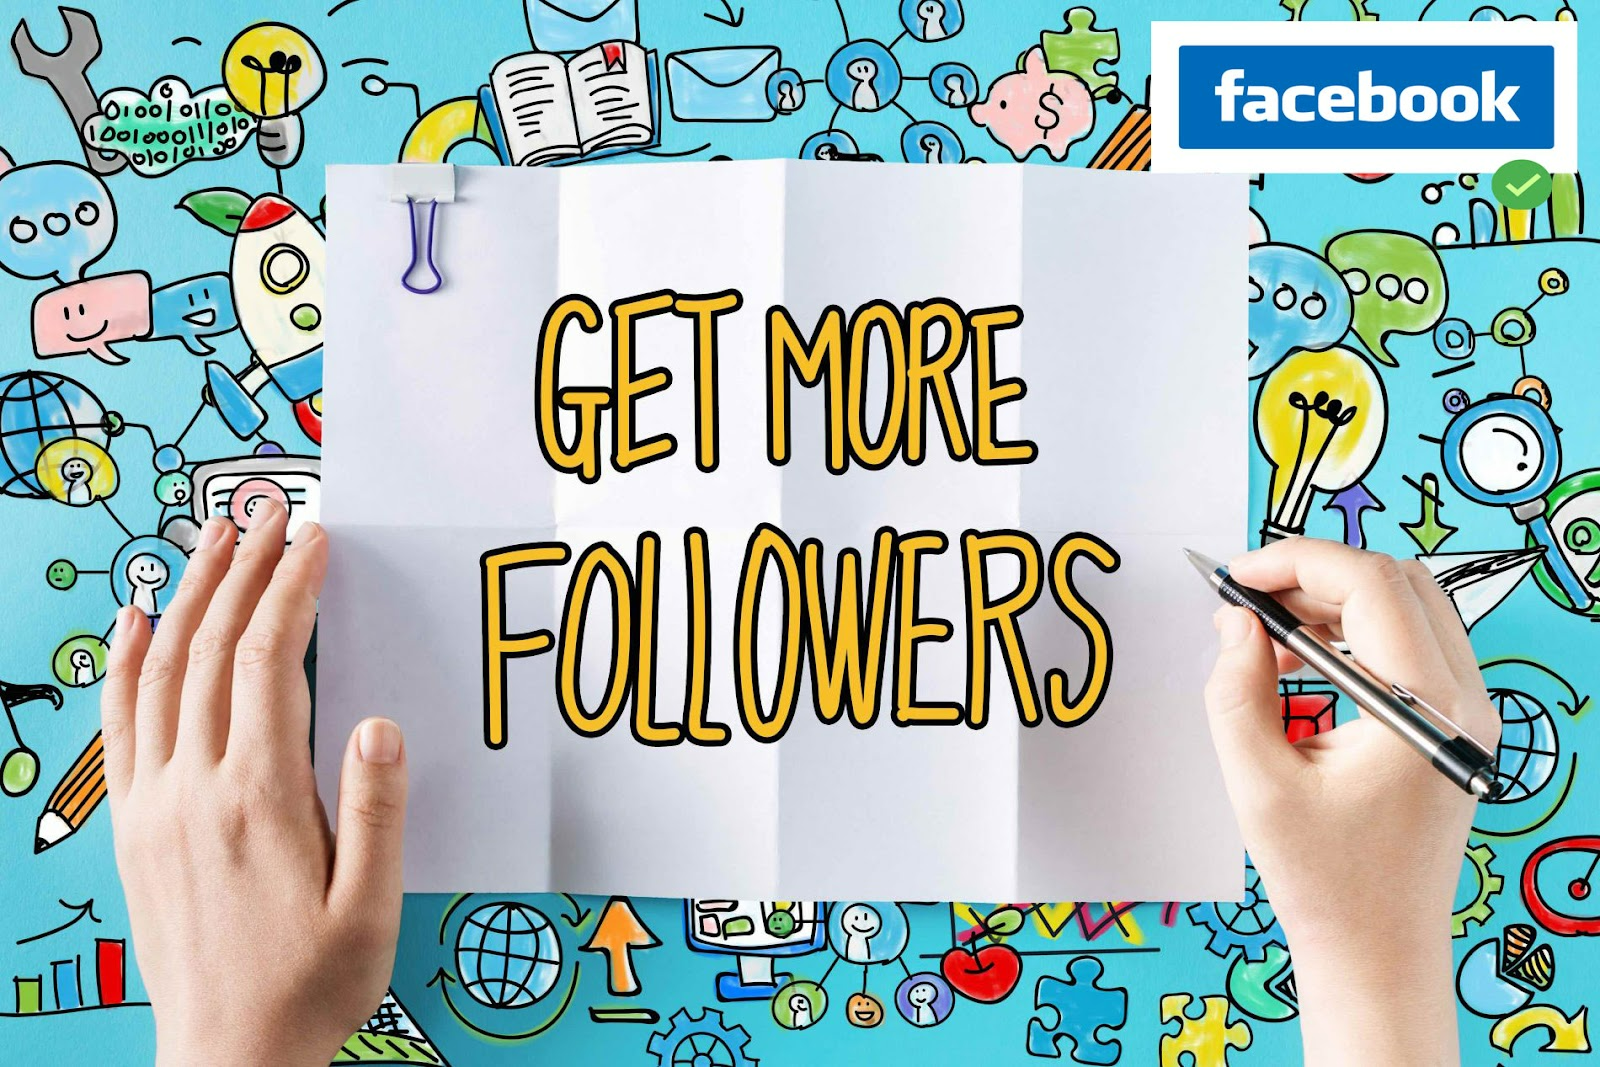 How To Increase Follower’s Facebook Page?